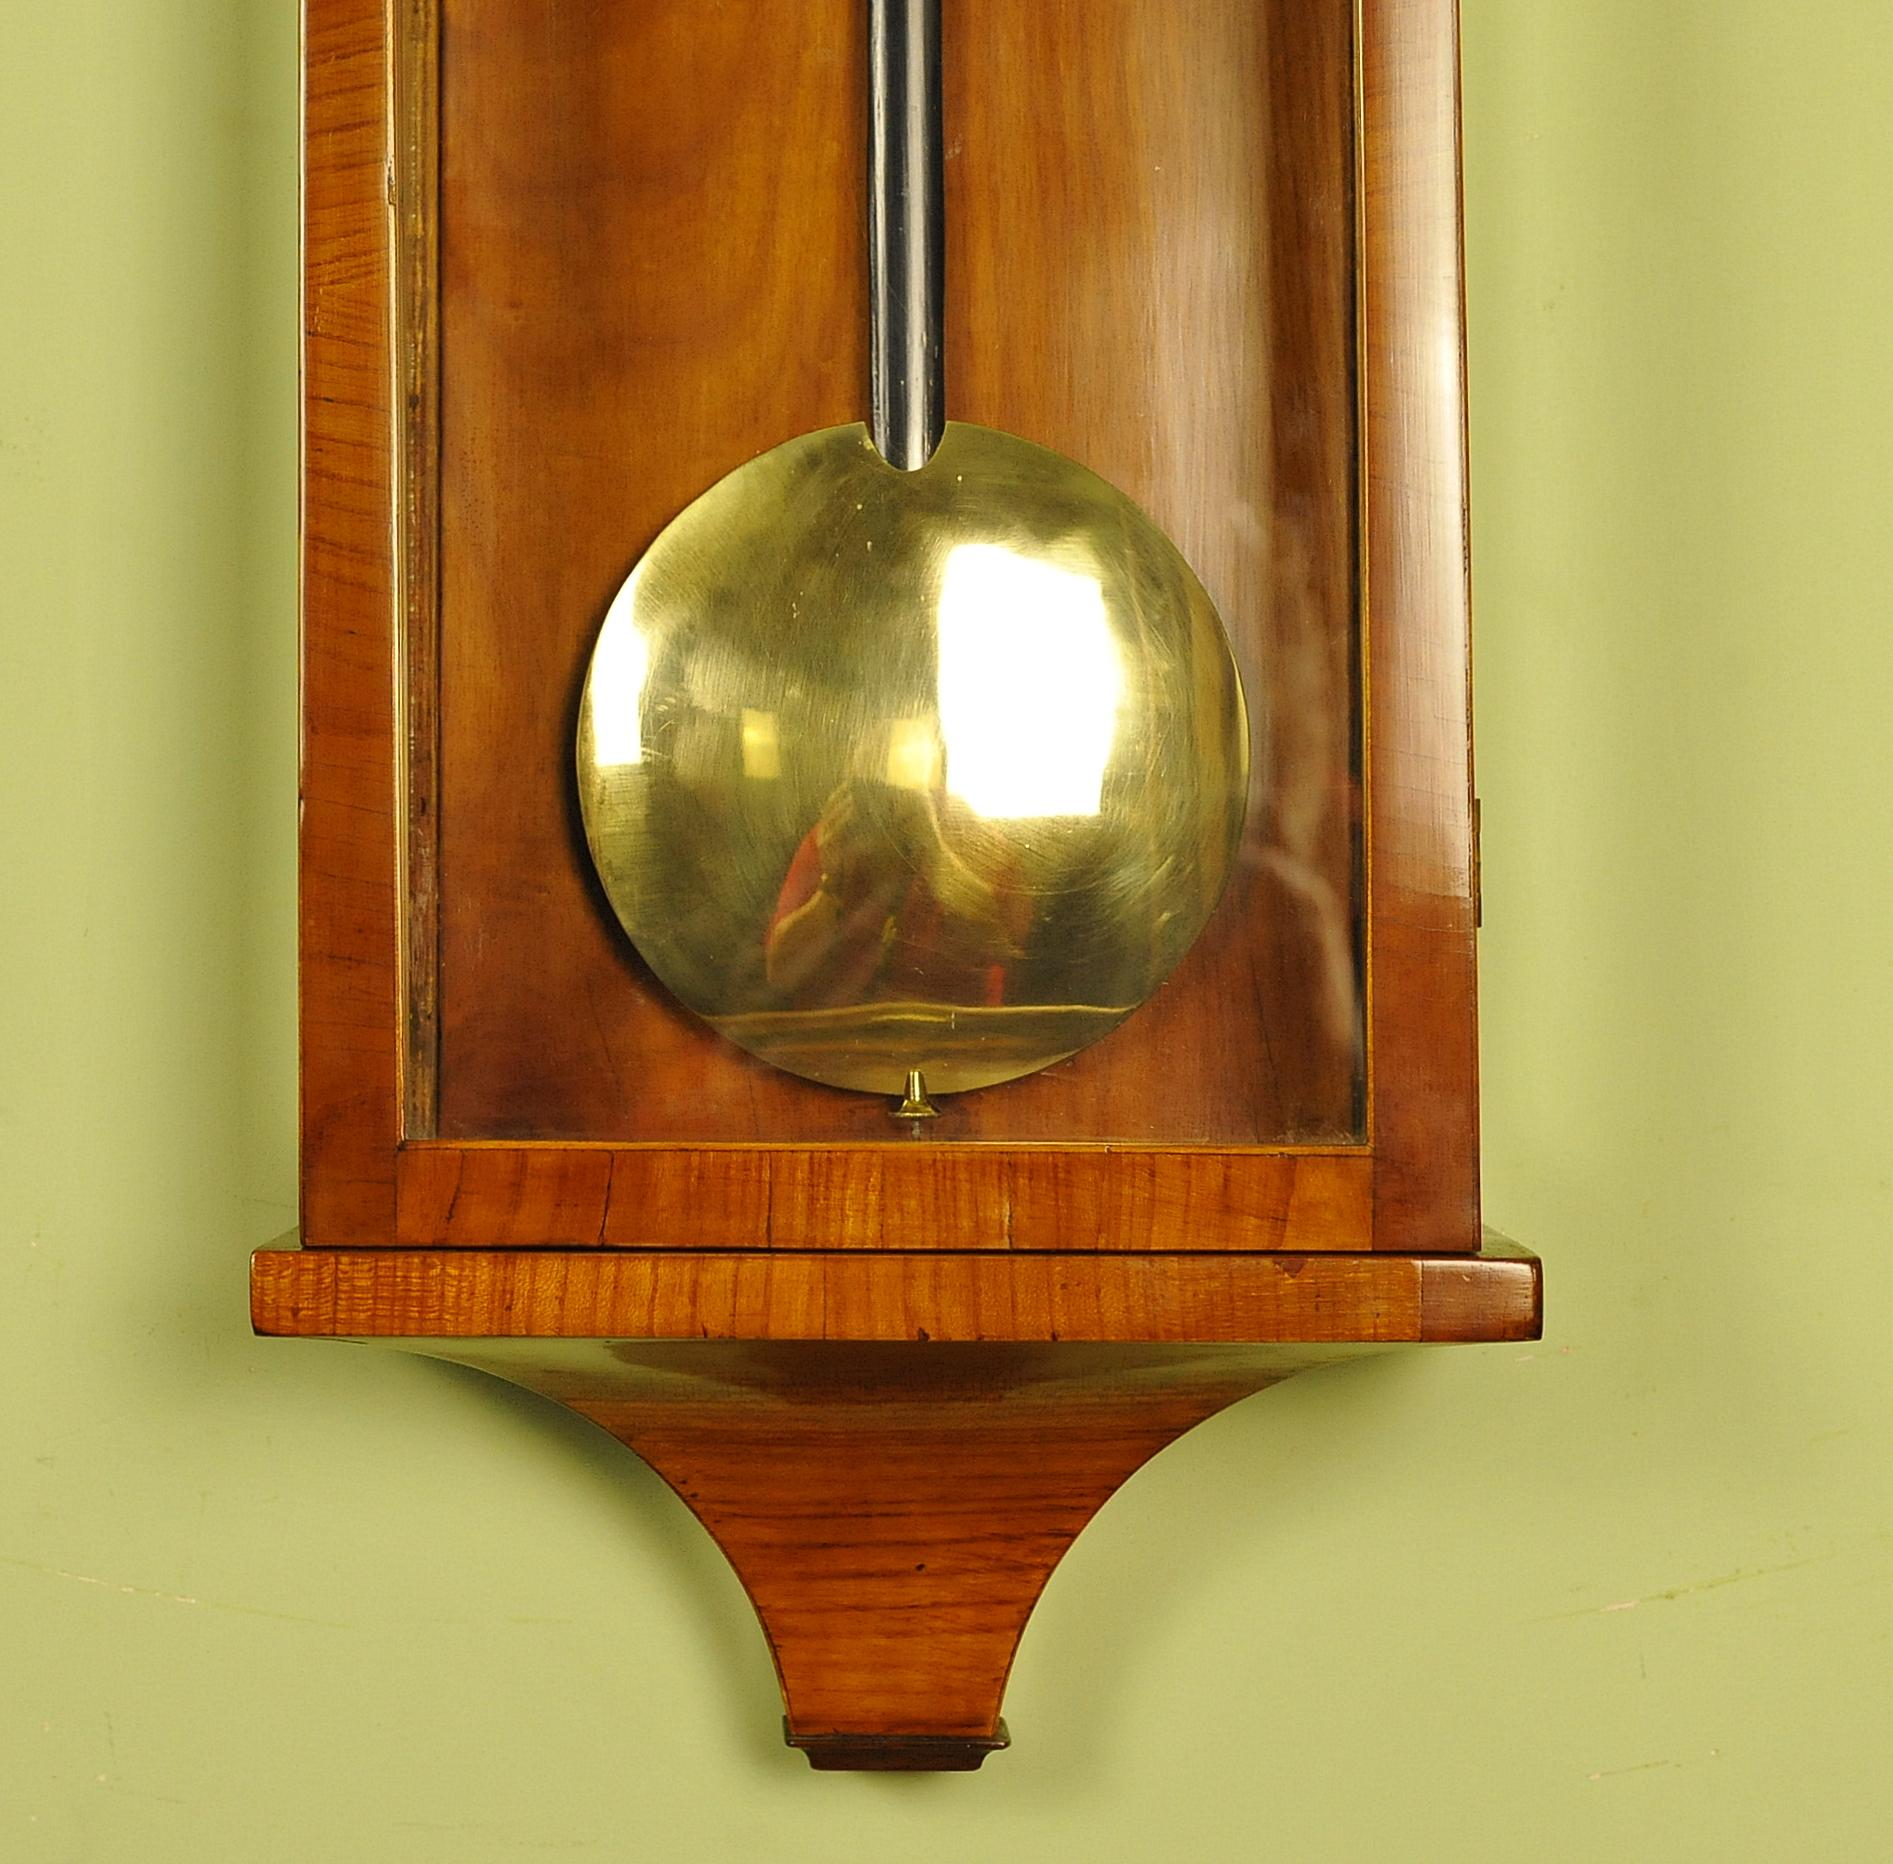 Satinwood Dachluhr Vienna Regulator Wall Clock In Good Condition For Sale In Chesterfield, GB